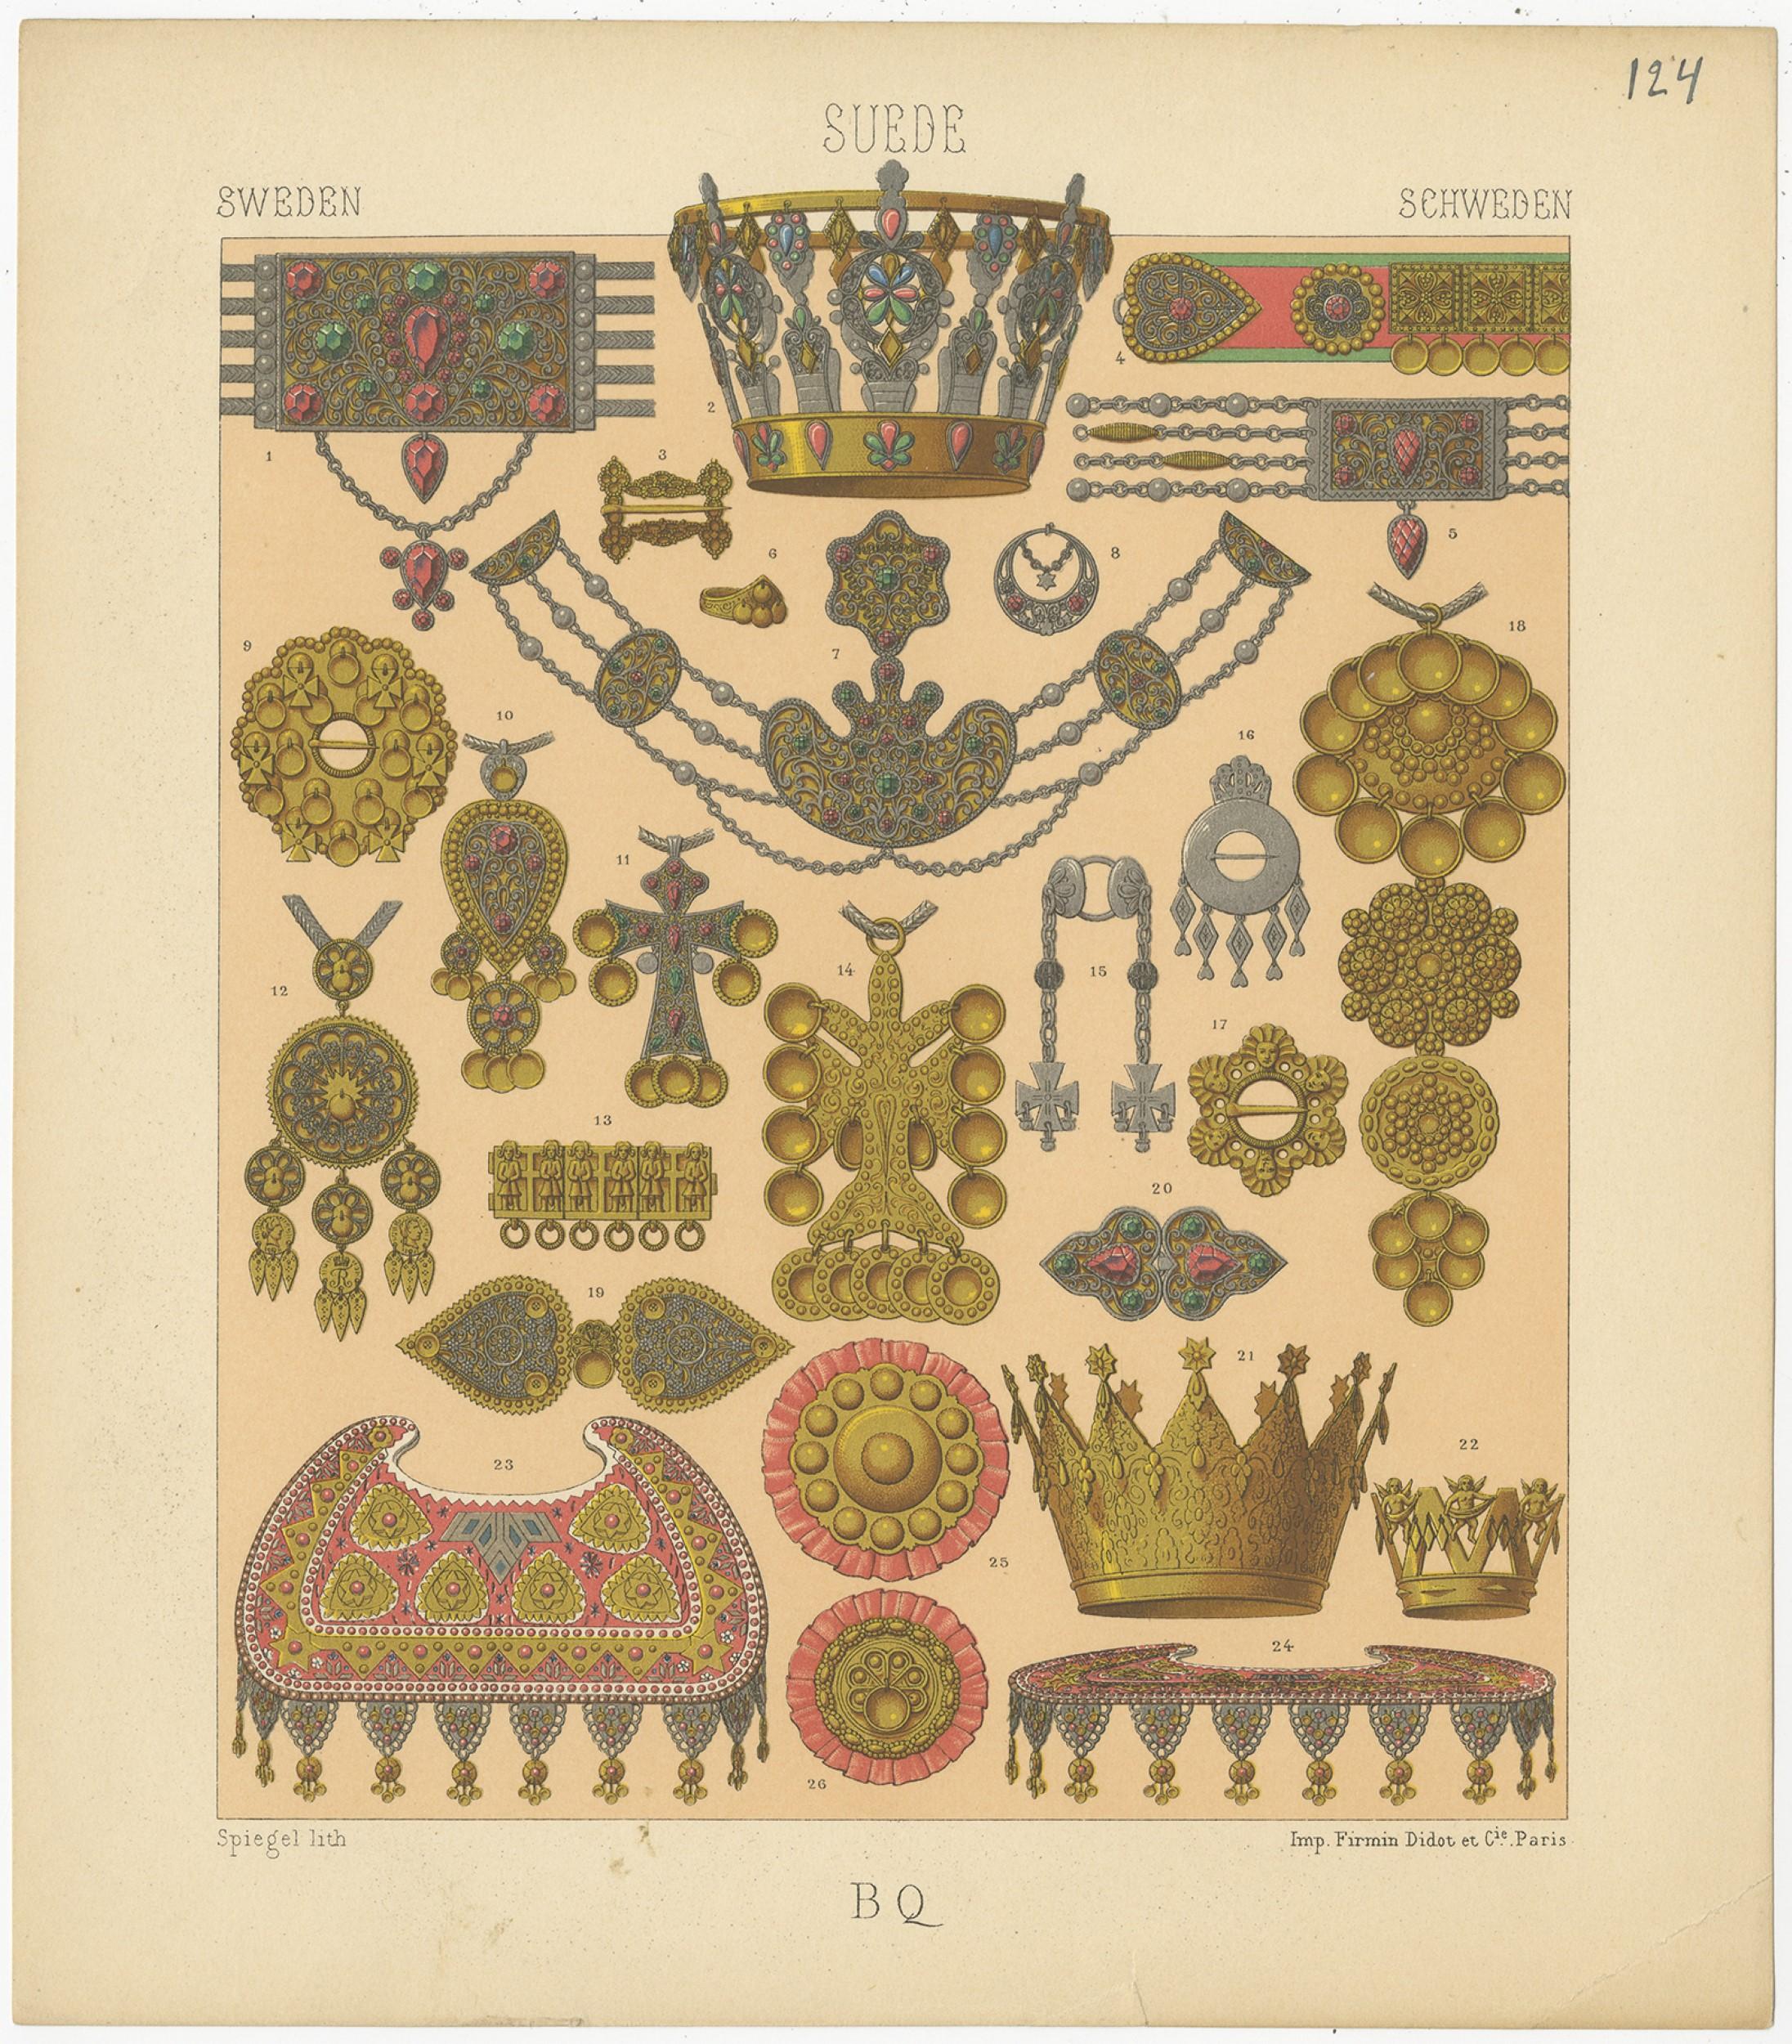 Antique print titled 'Sweden - Suede - Schweden'. Chromolithograph of Swedish Jewelry. This print originates from 'Le Costume Historique' by M.A. Racinet. Published, circa 1880.